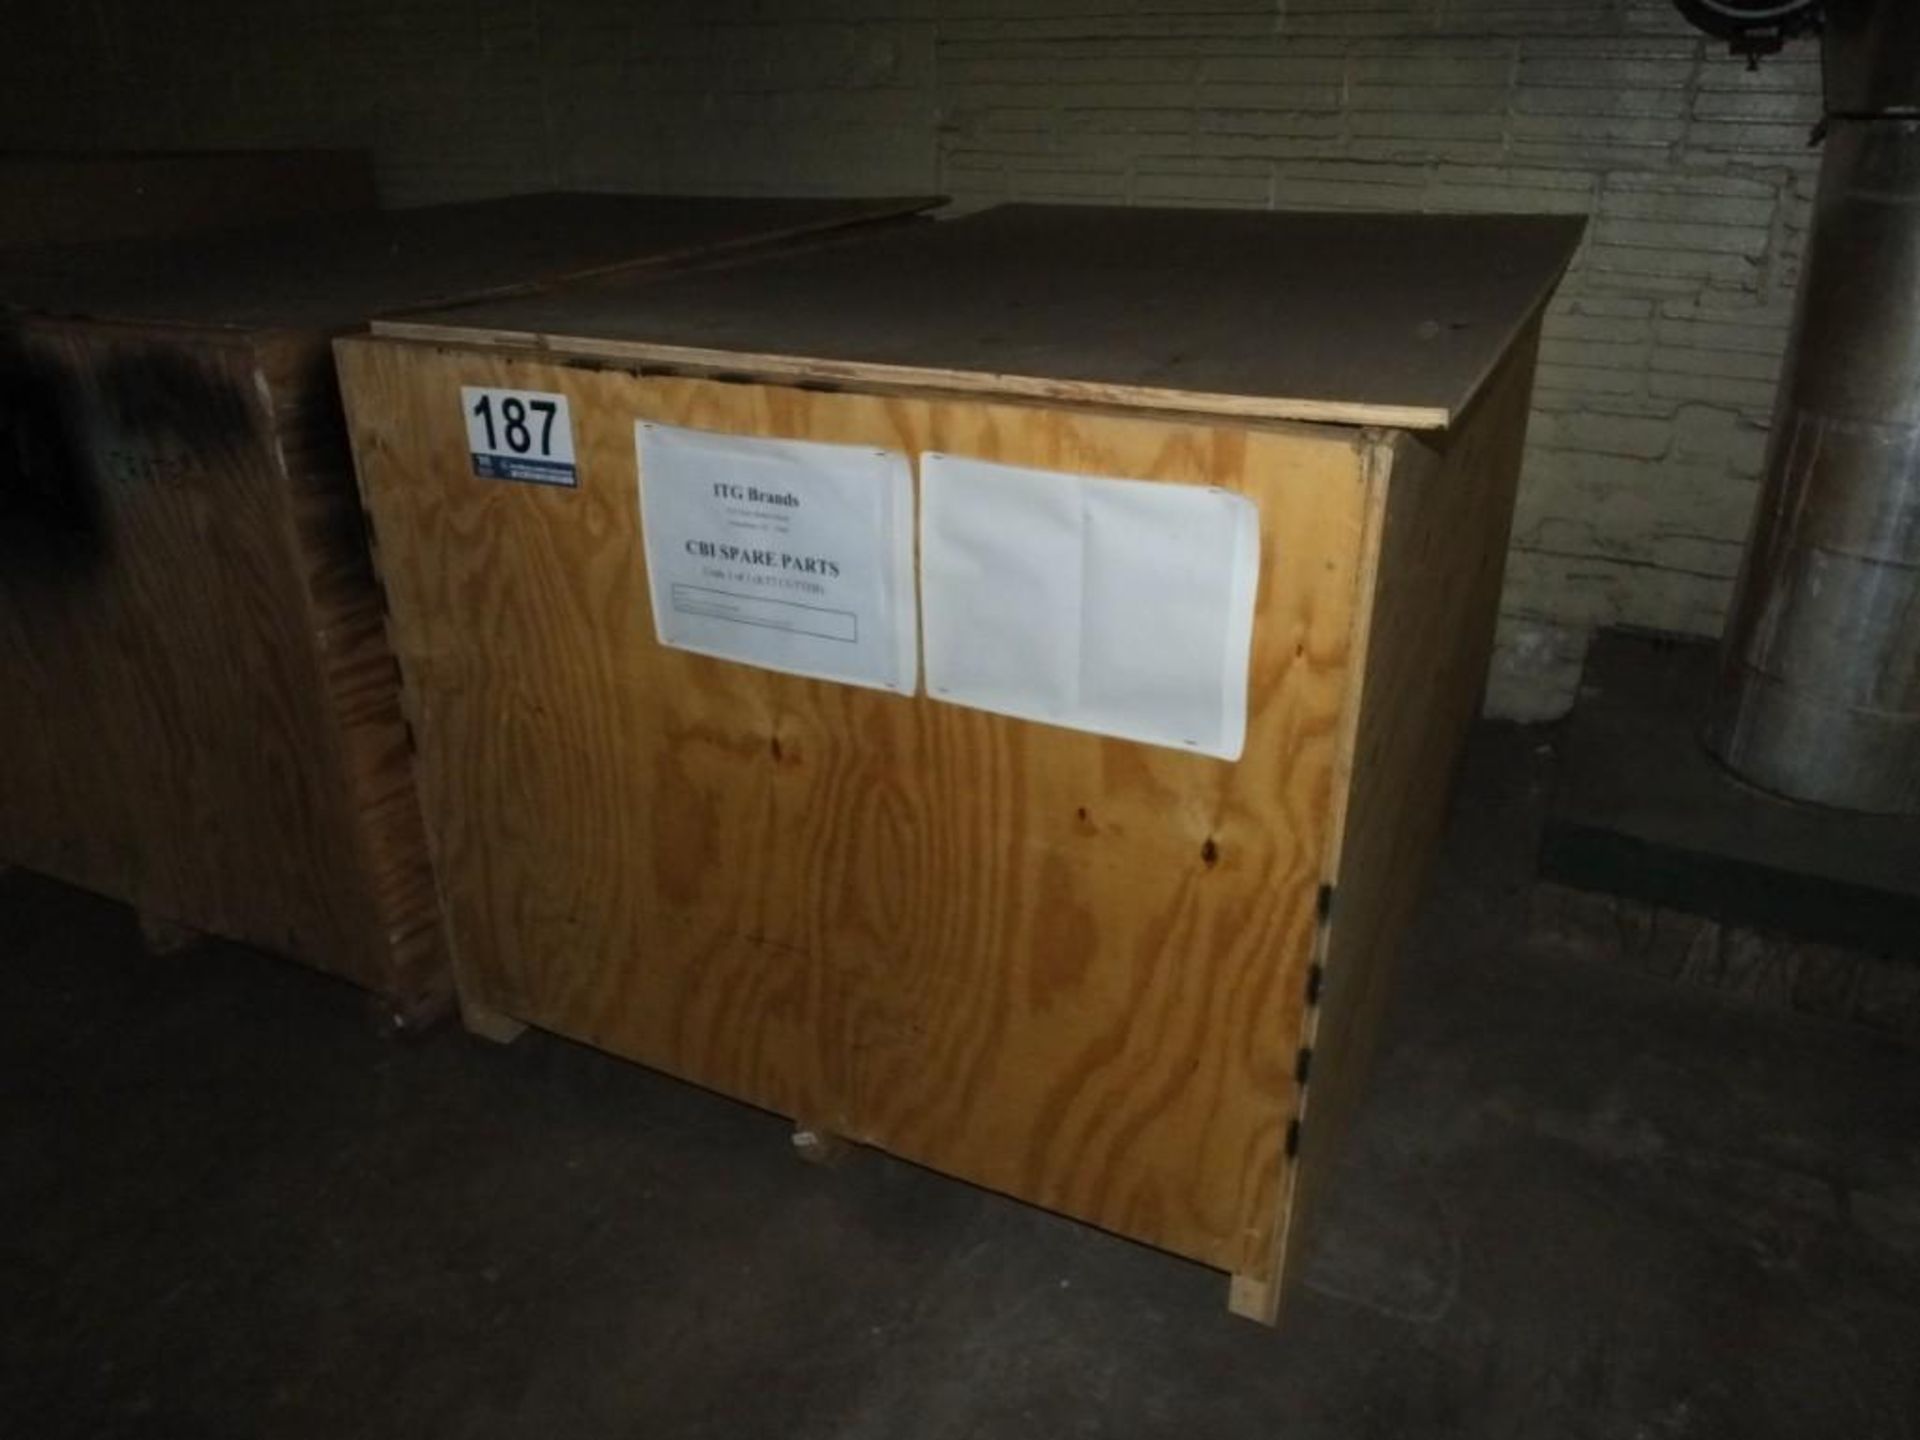 Hauni KT2 Spare Parts Crate with Approx. 150 Line Items and Over 500 Parts - Image 3 of 3